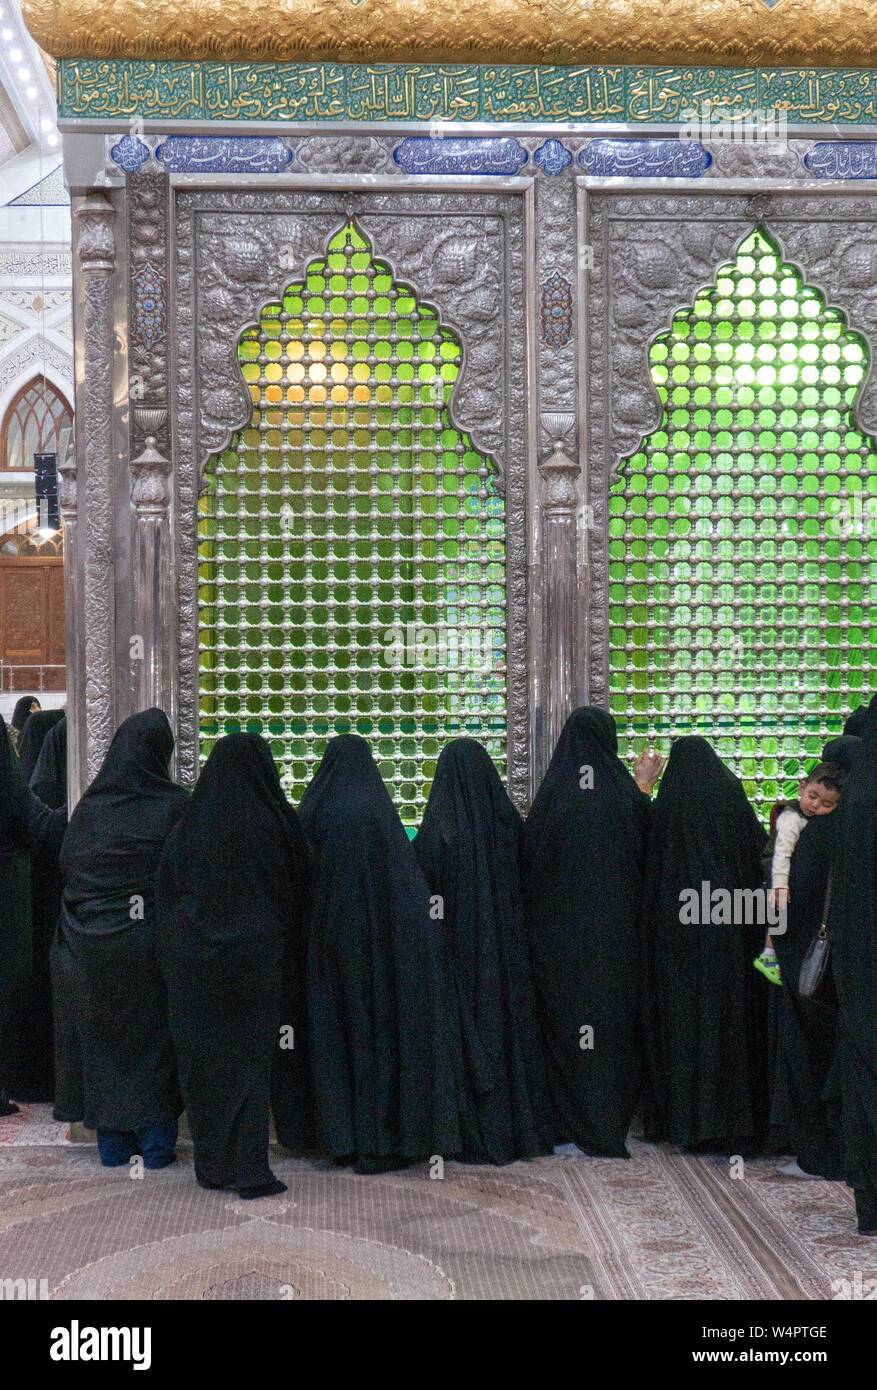 Women praying in front of the tomb of Ayatollah Khomeini in the Holy Shrine, Tehran, Iran Stock Photo